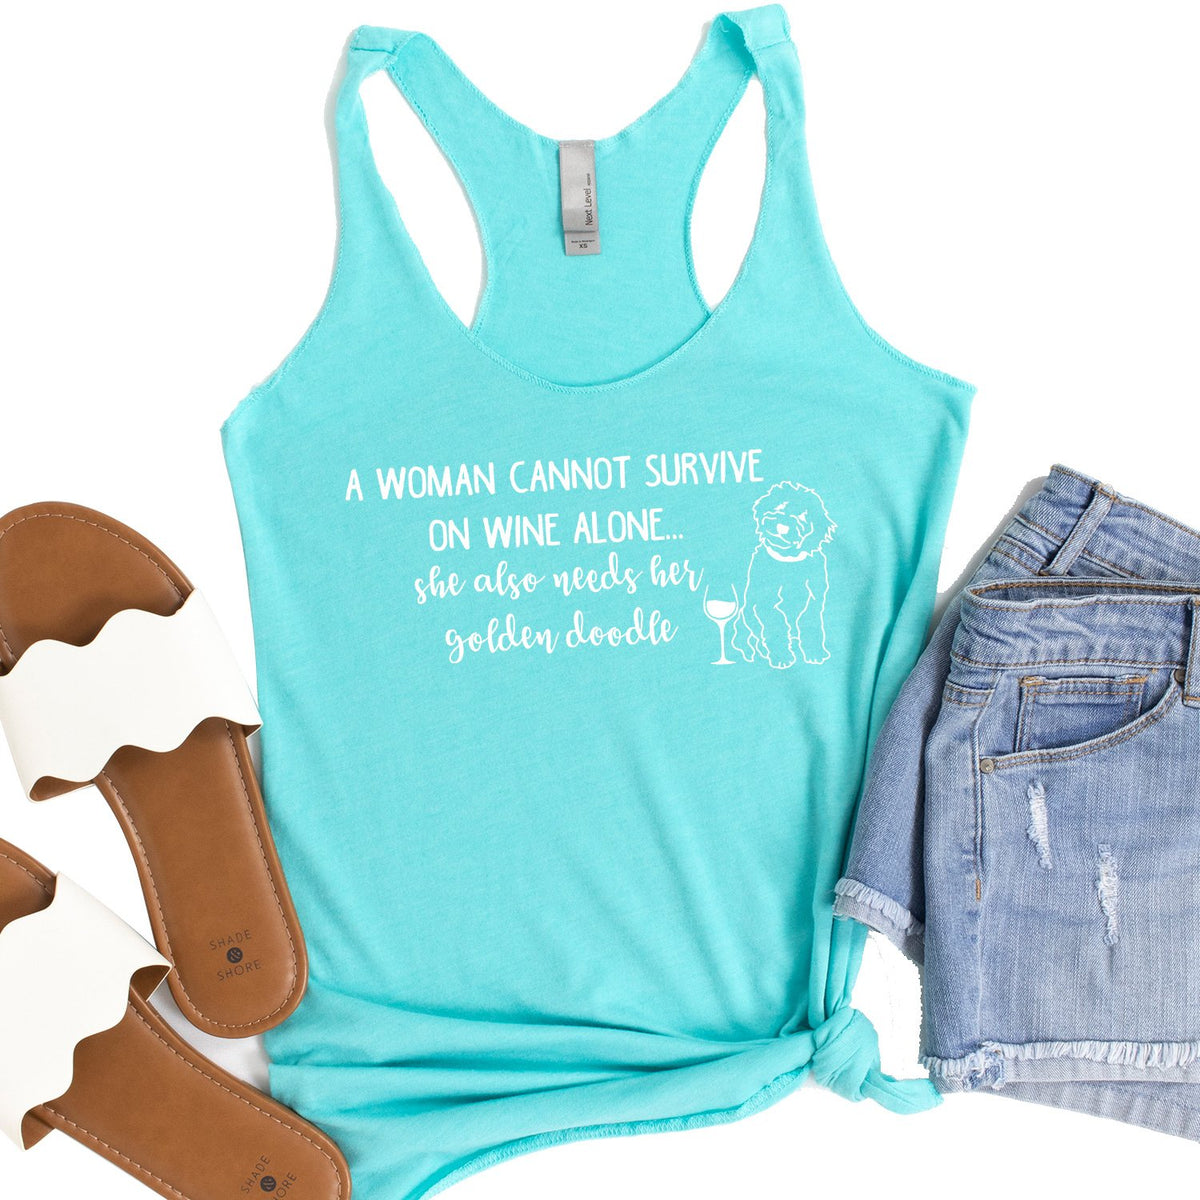 A Woman Cannot Survive on Wine Alone, She also Needs her Golden Doodle - Tank Top Racerback